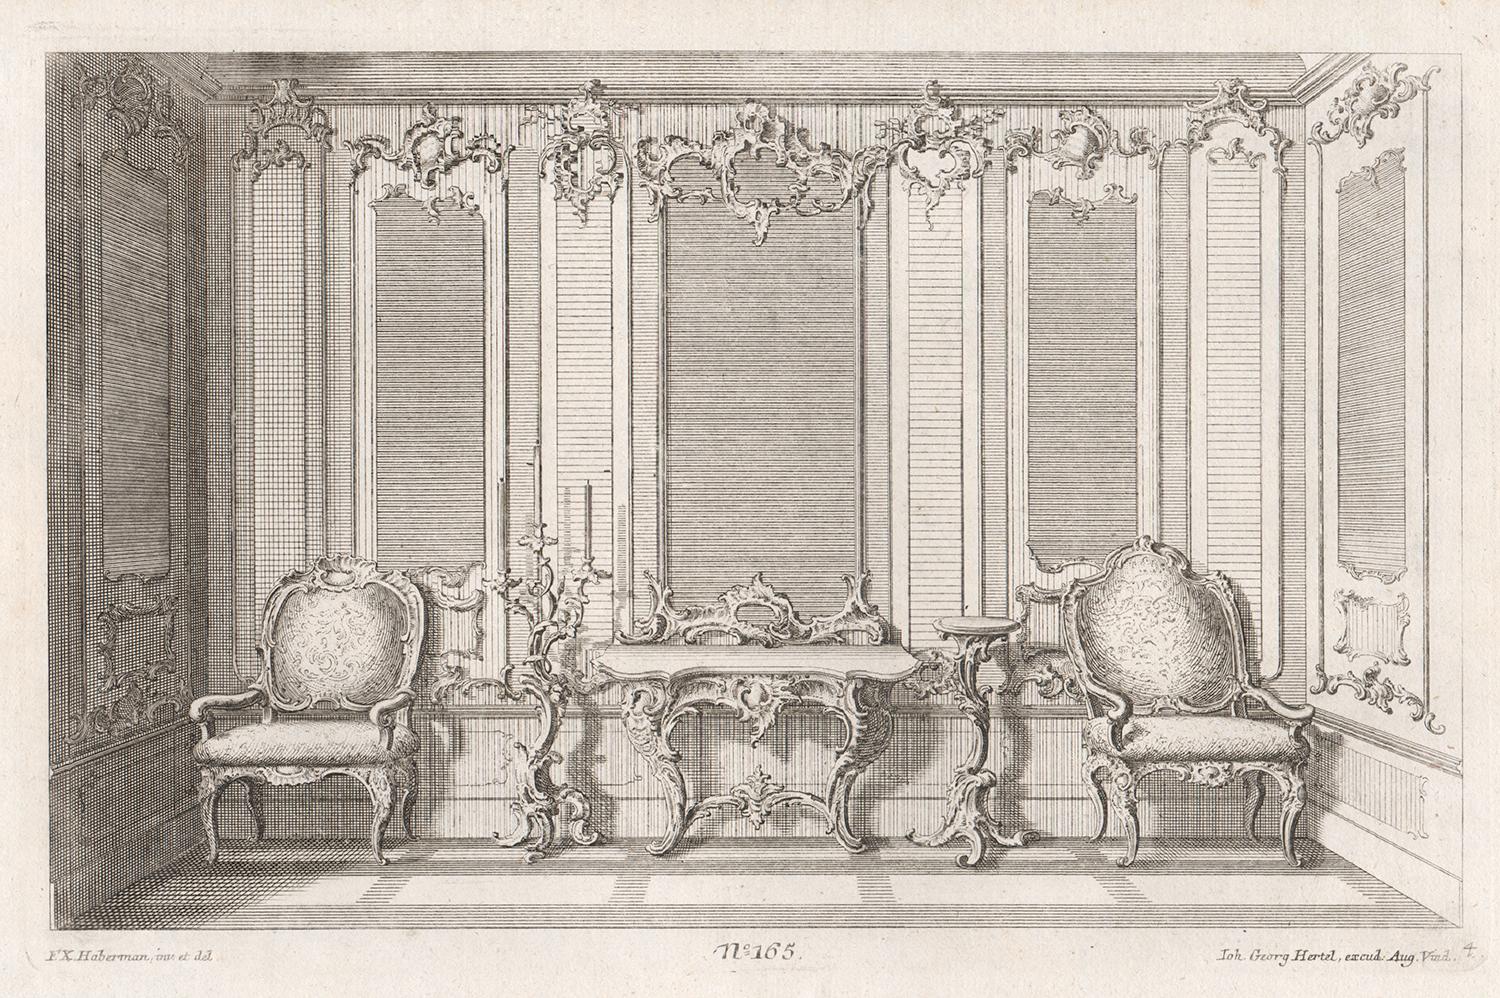 Rococo interior design and furniture, German mid 18th century etching